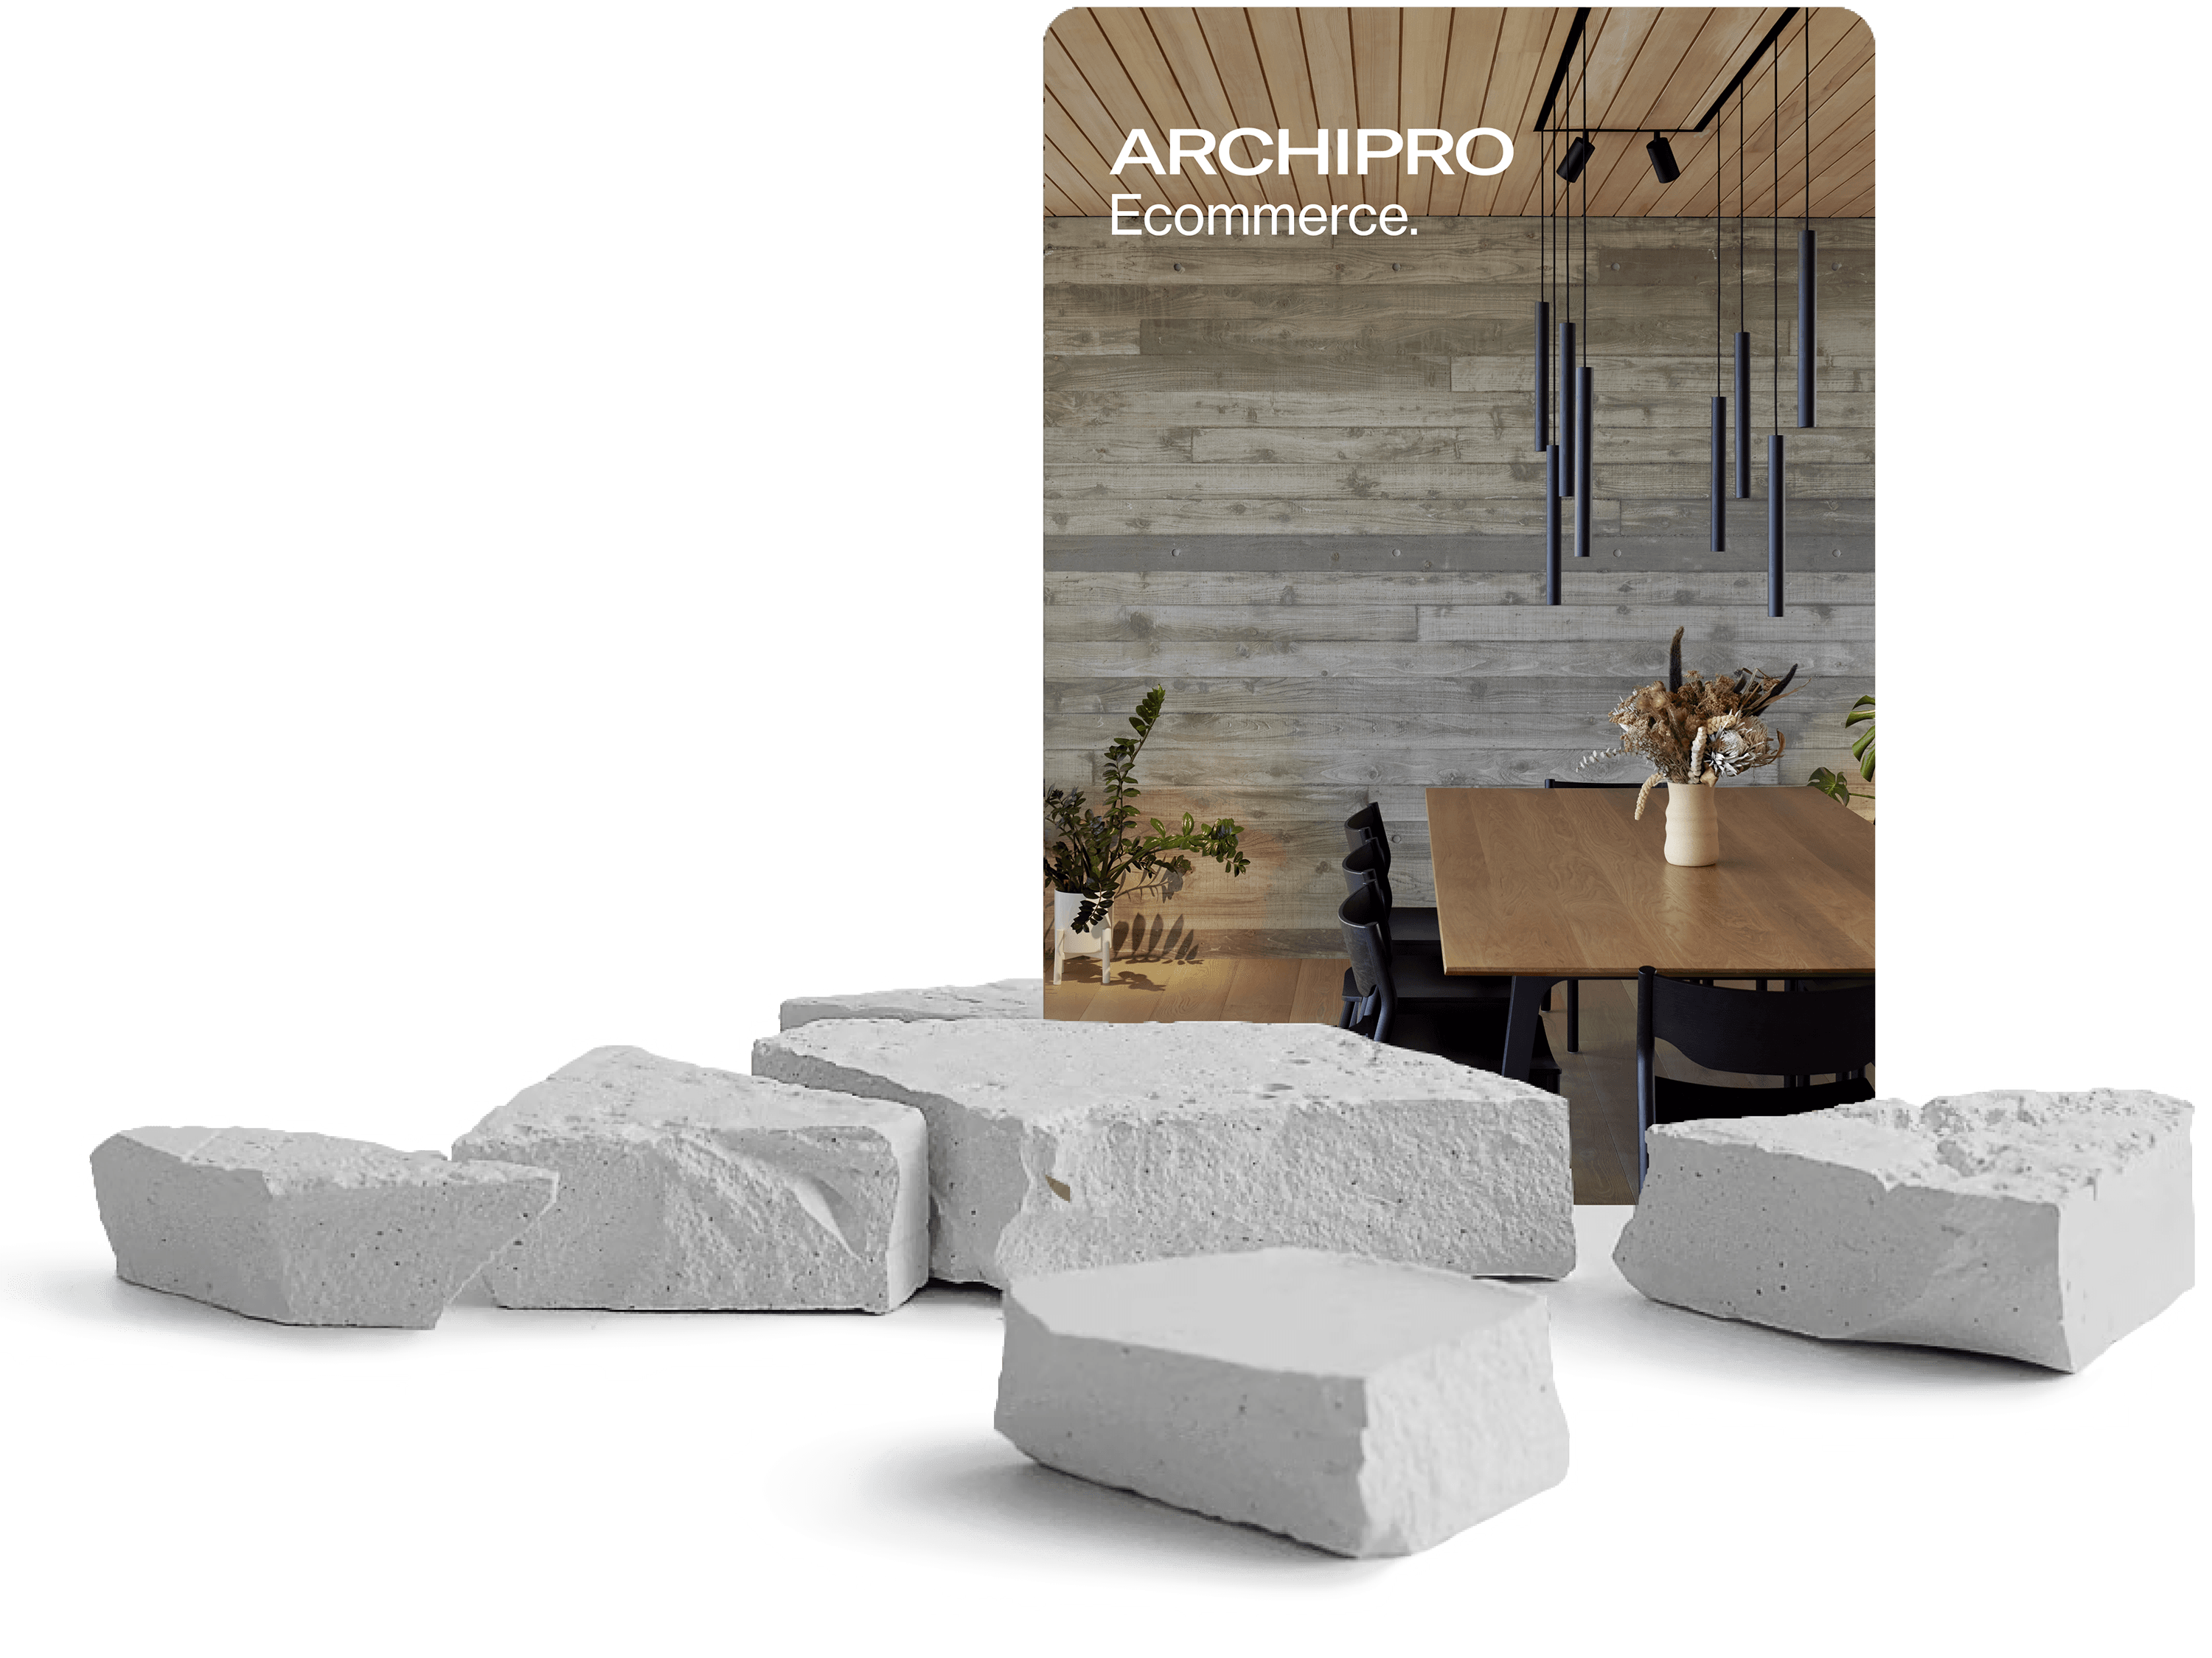 Archipro  welcome ecommerce image